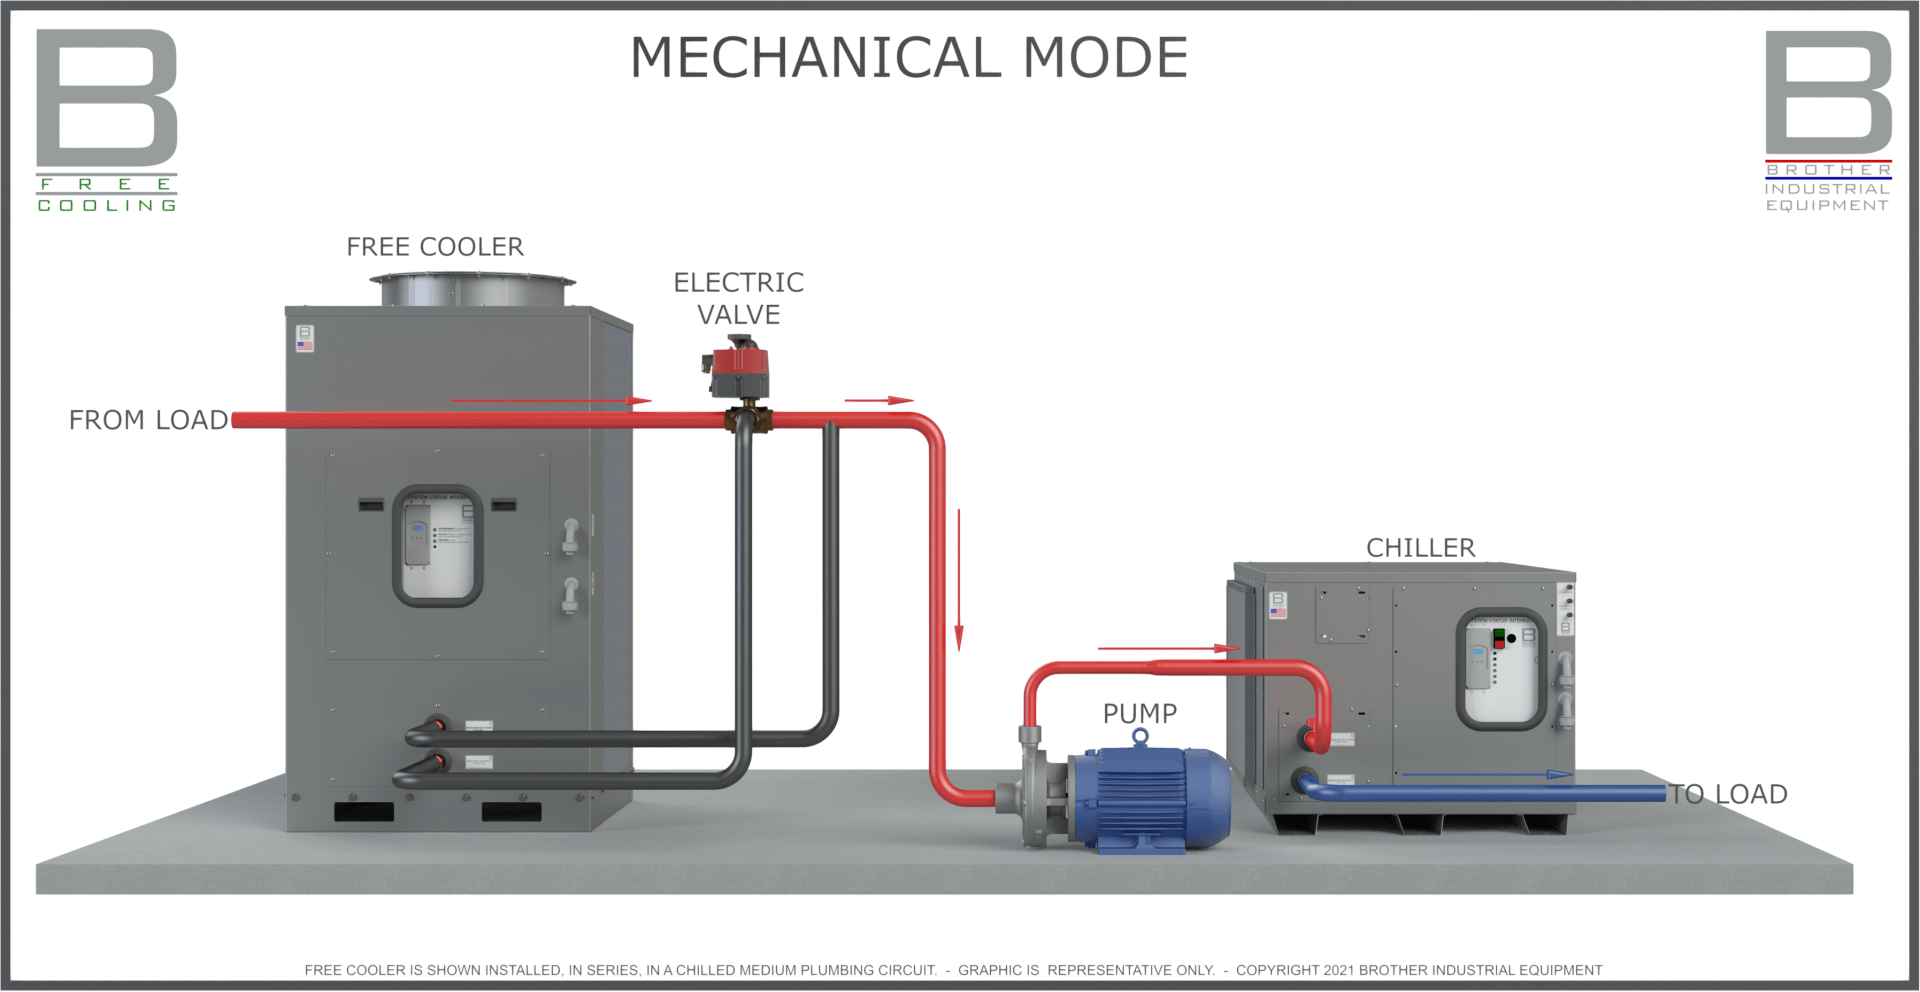 Brother free cooling, chiller system, water side economizer, save energy, save power, efficient chiller, efficient chiller system, what is free cooling, free cooling diagram